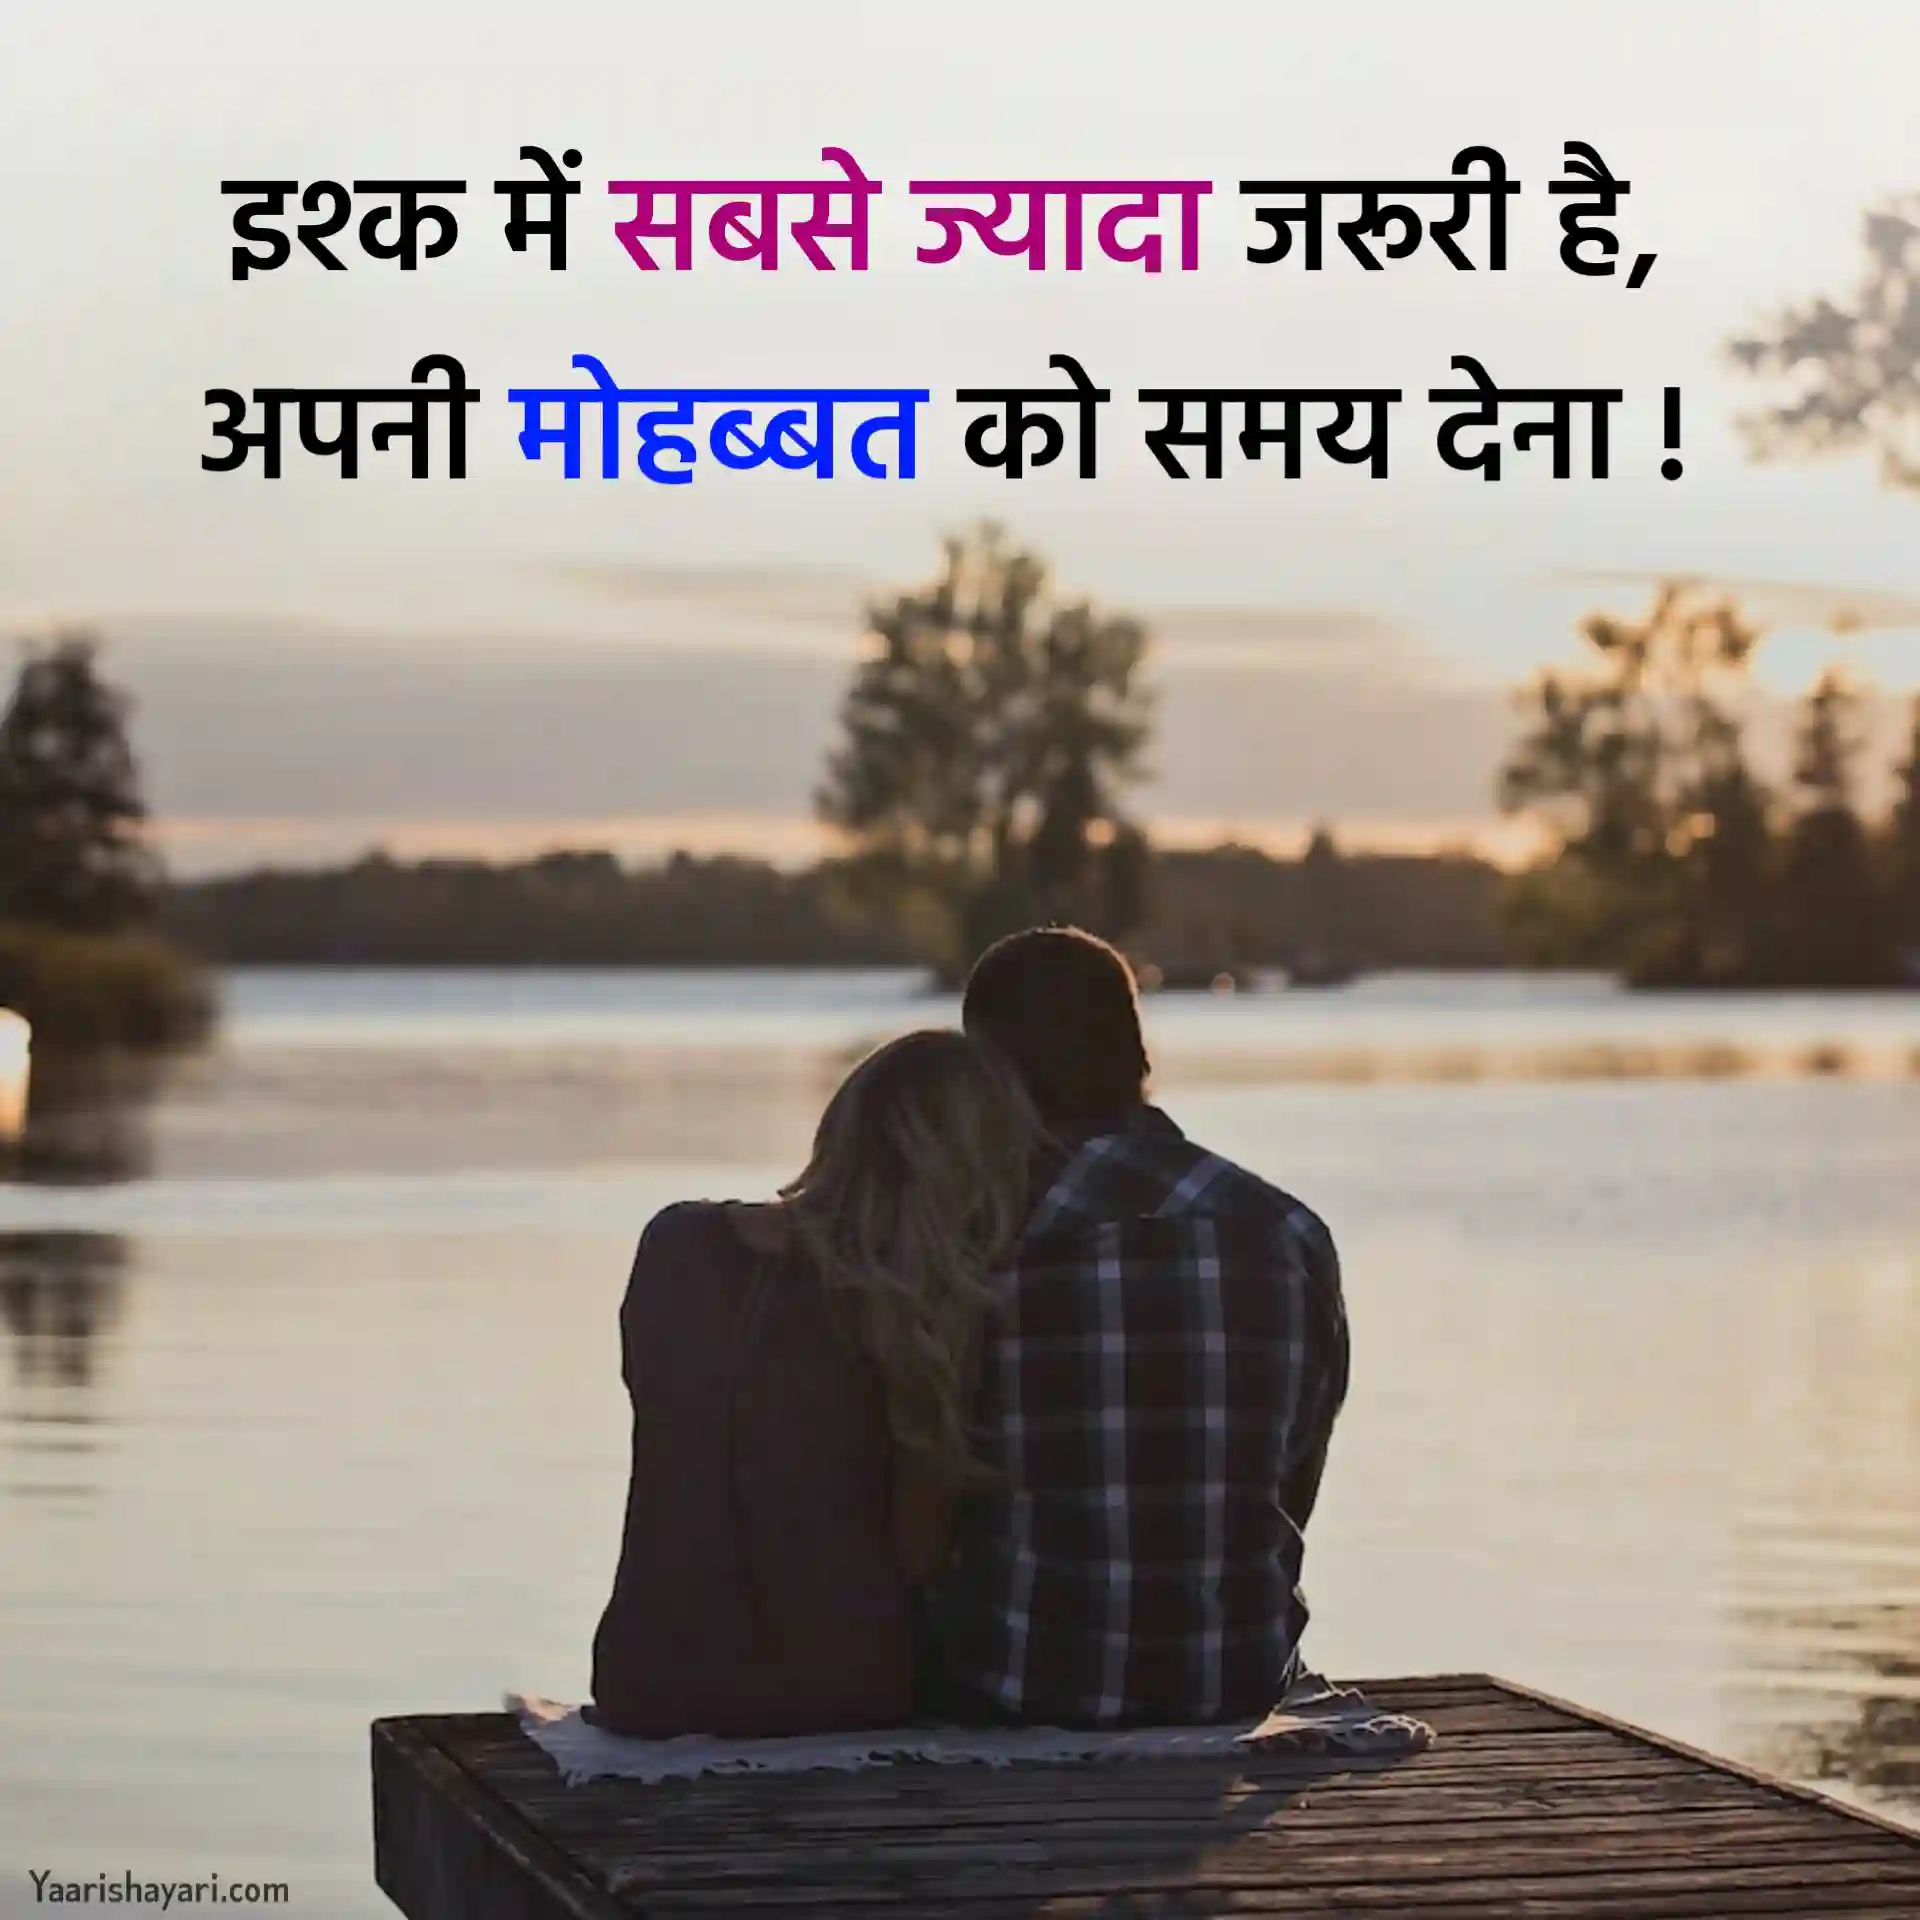 Love Quotes In Hindi.webp